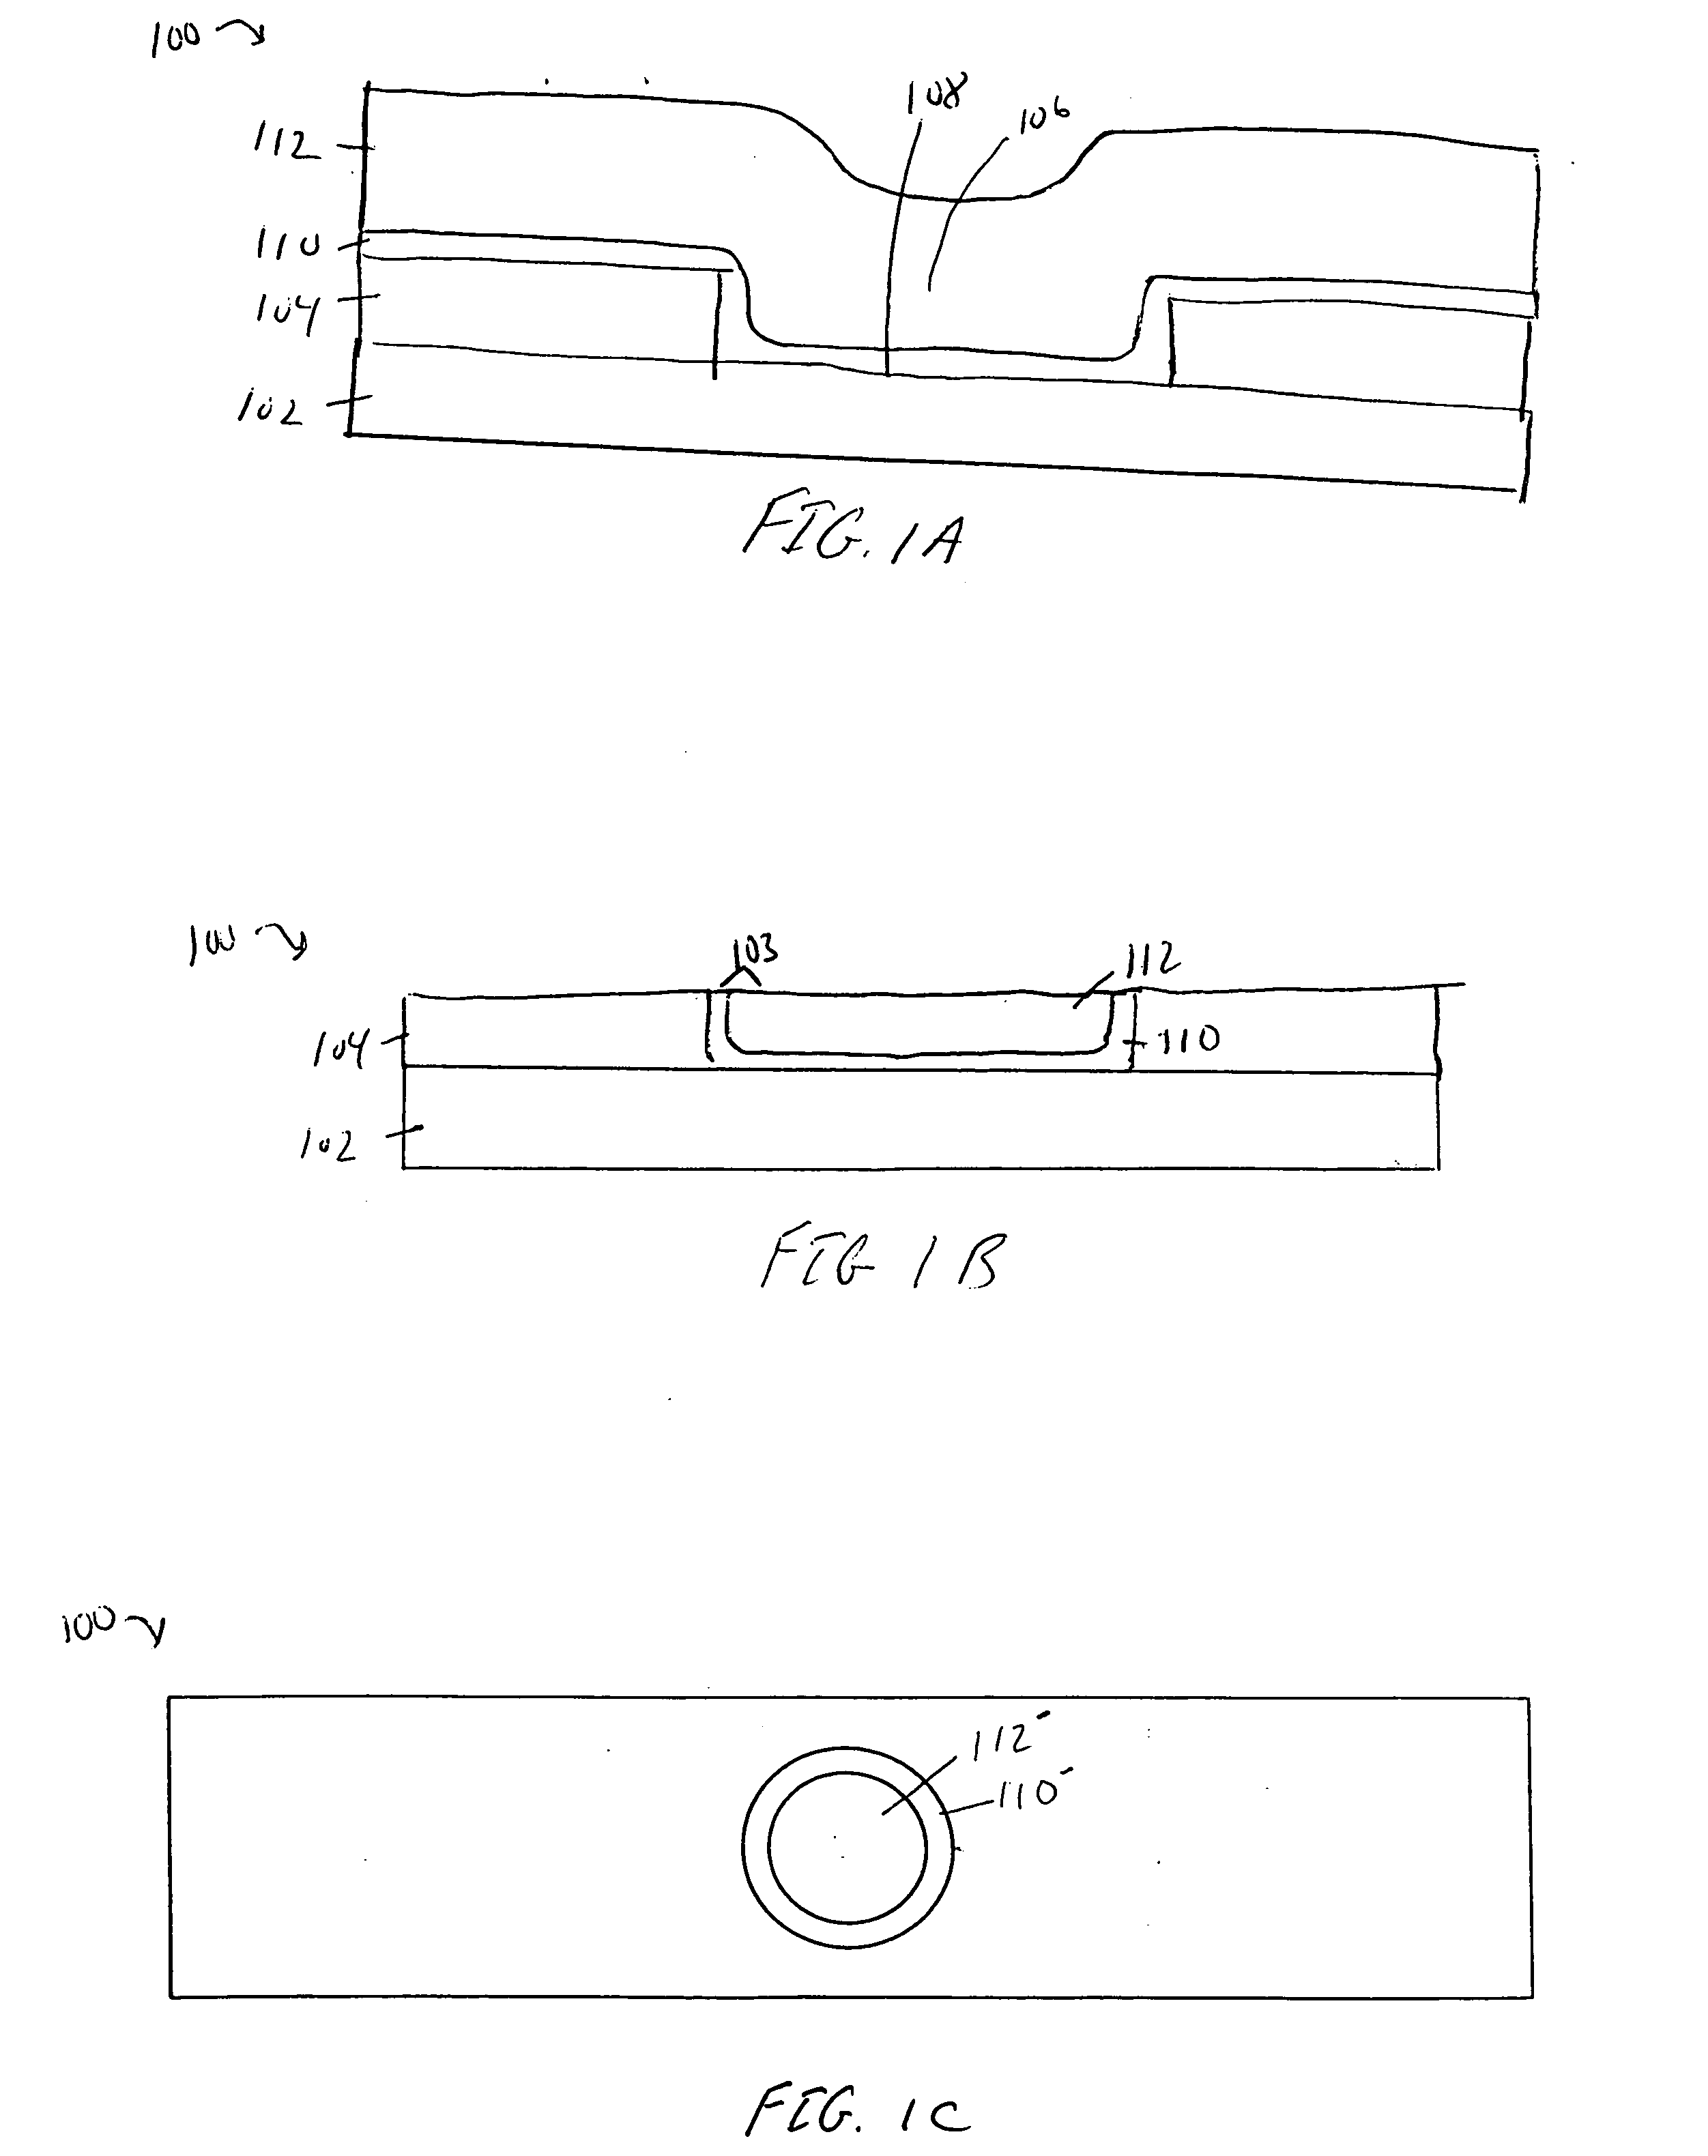 Electrode structures and method to form electrode structures that minimize electrode work function variation